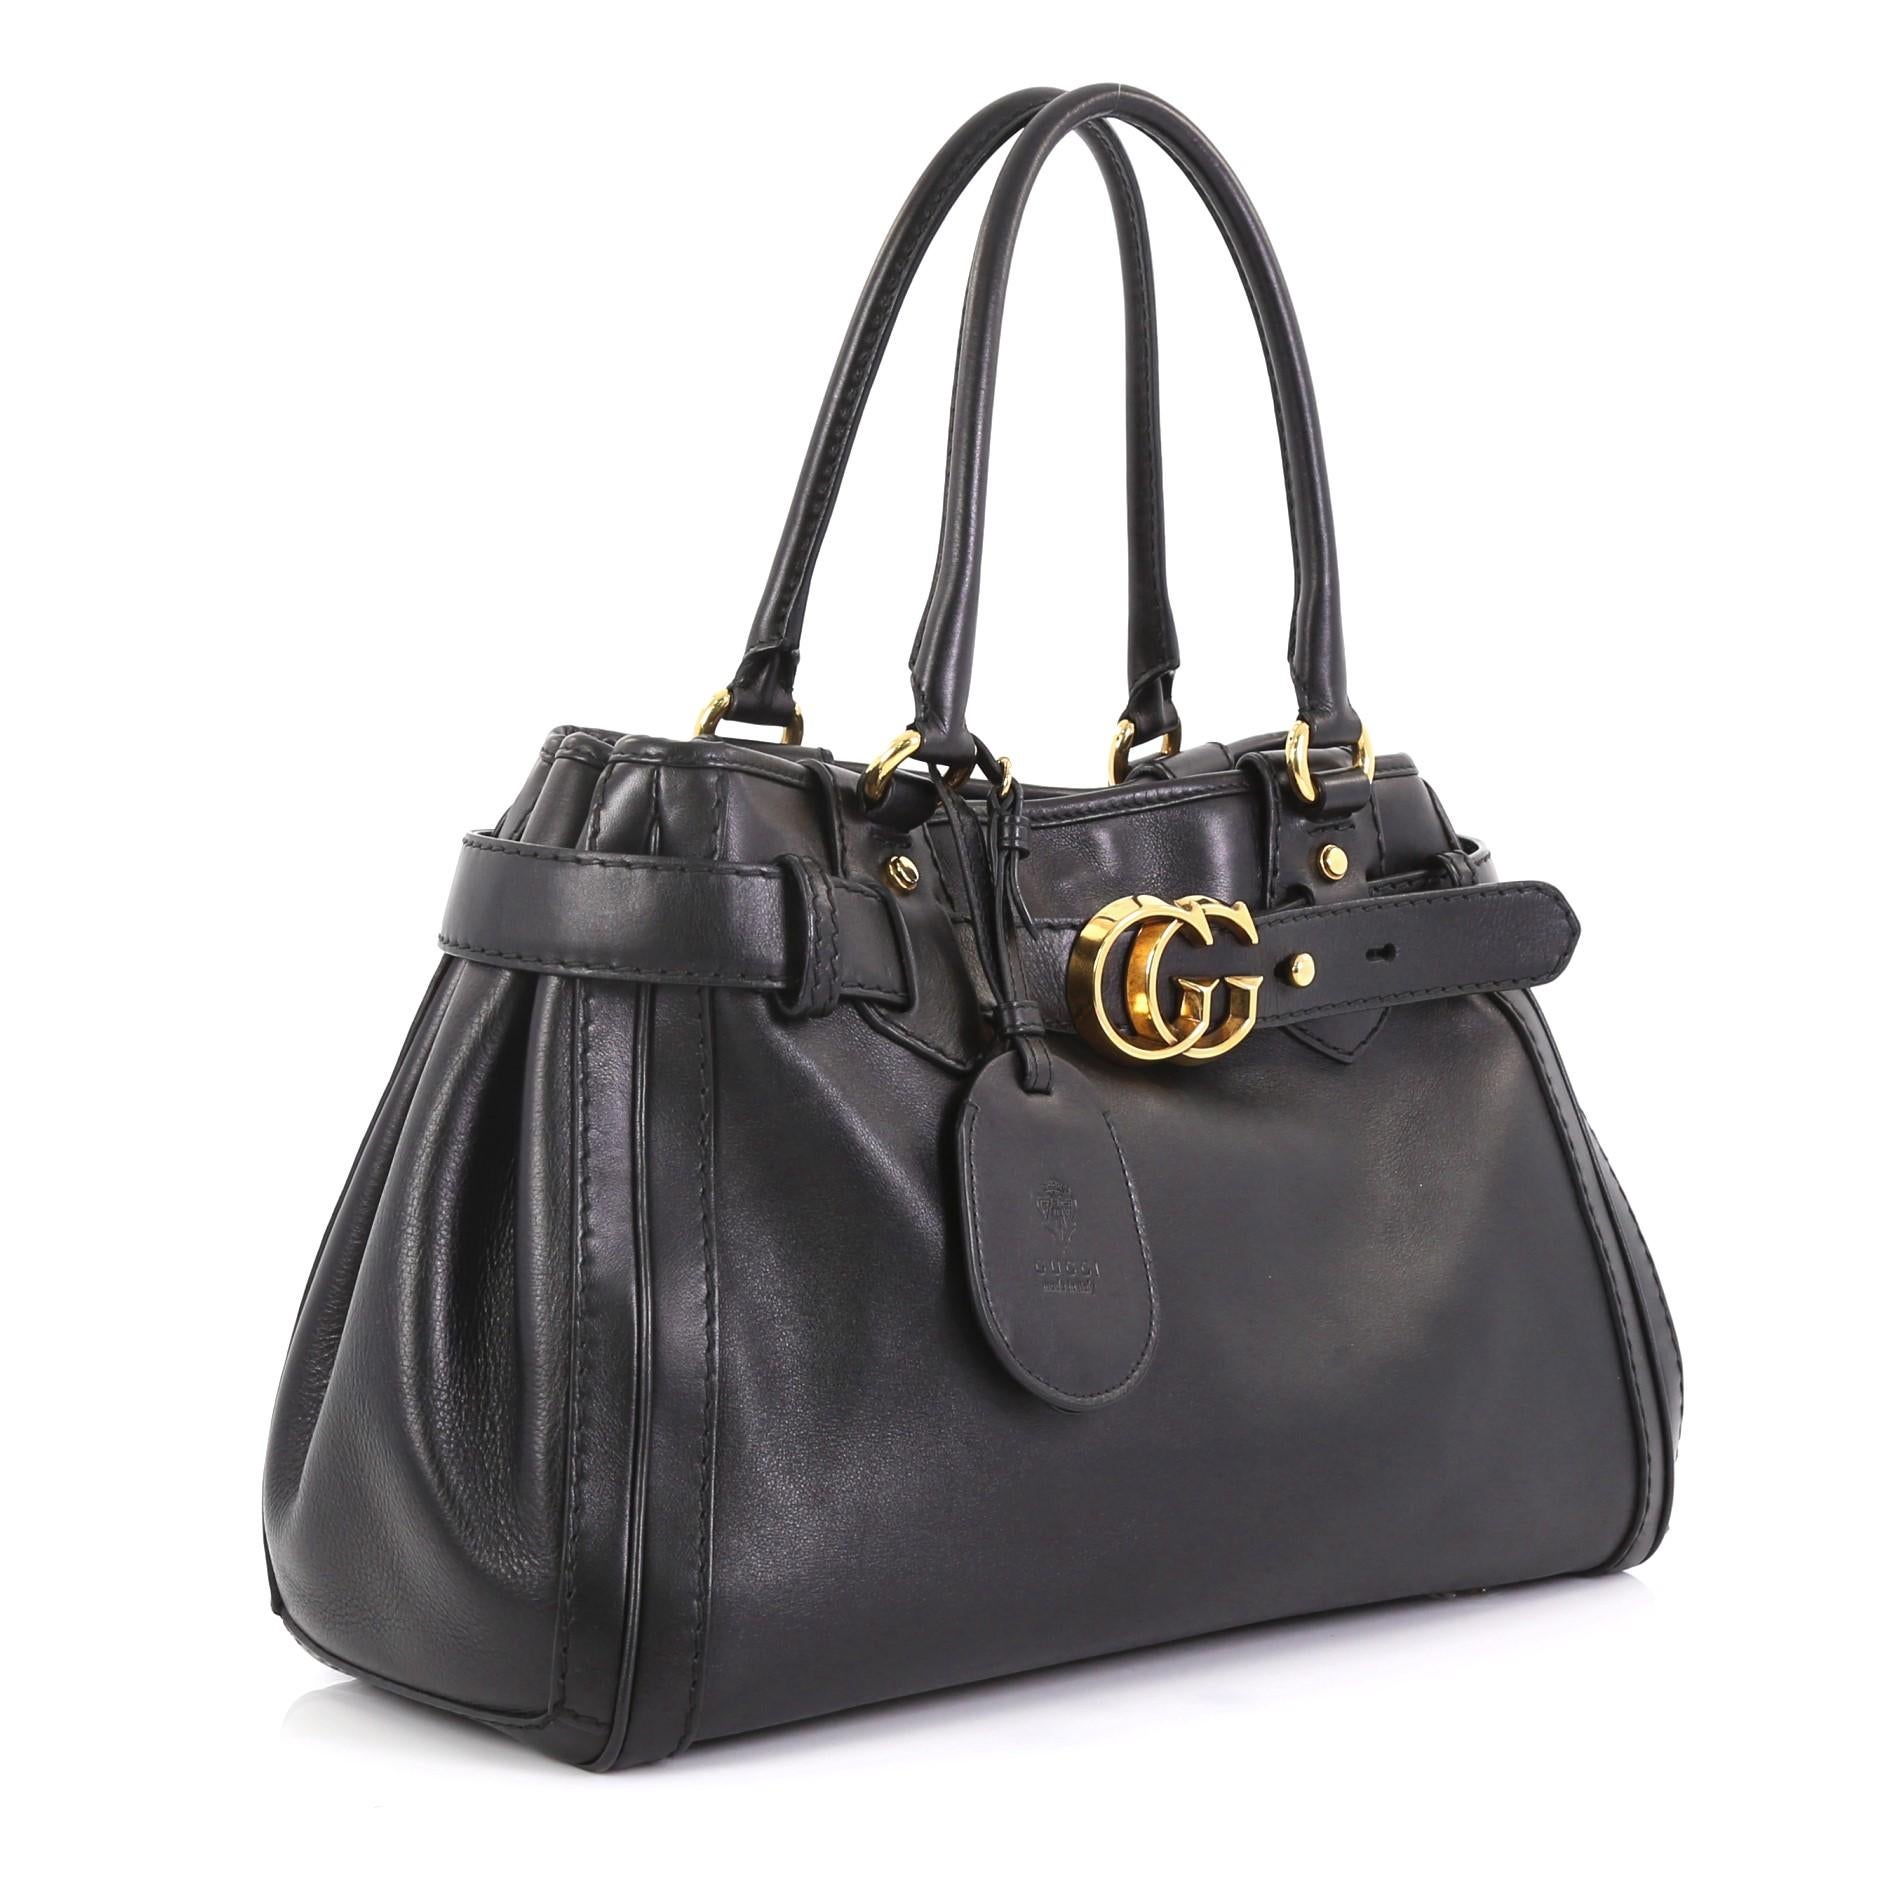 This Gucci GG Running Tote Leather Medium, crafted in black leather, features dual rolled leather top handles, top belt with loops and interlocking GG buckle, protective base studs, and gold-tone hardware. Its magnetic snap button closure opens to a